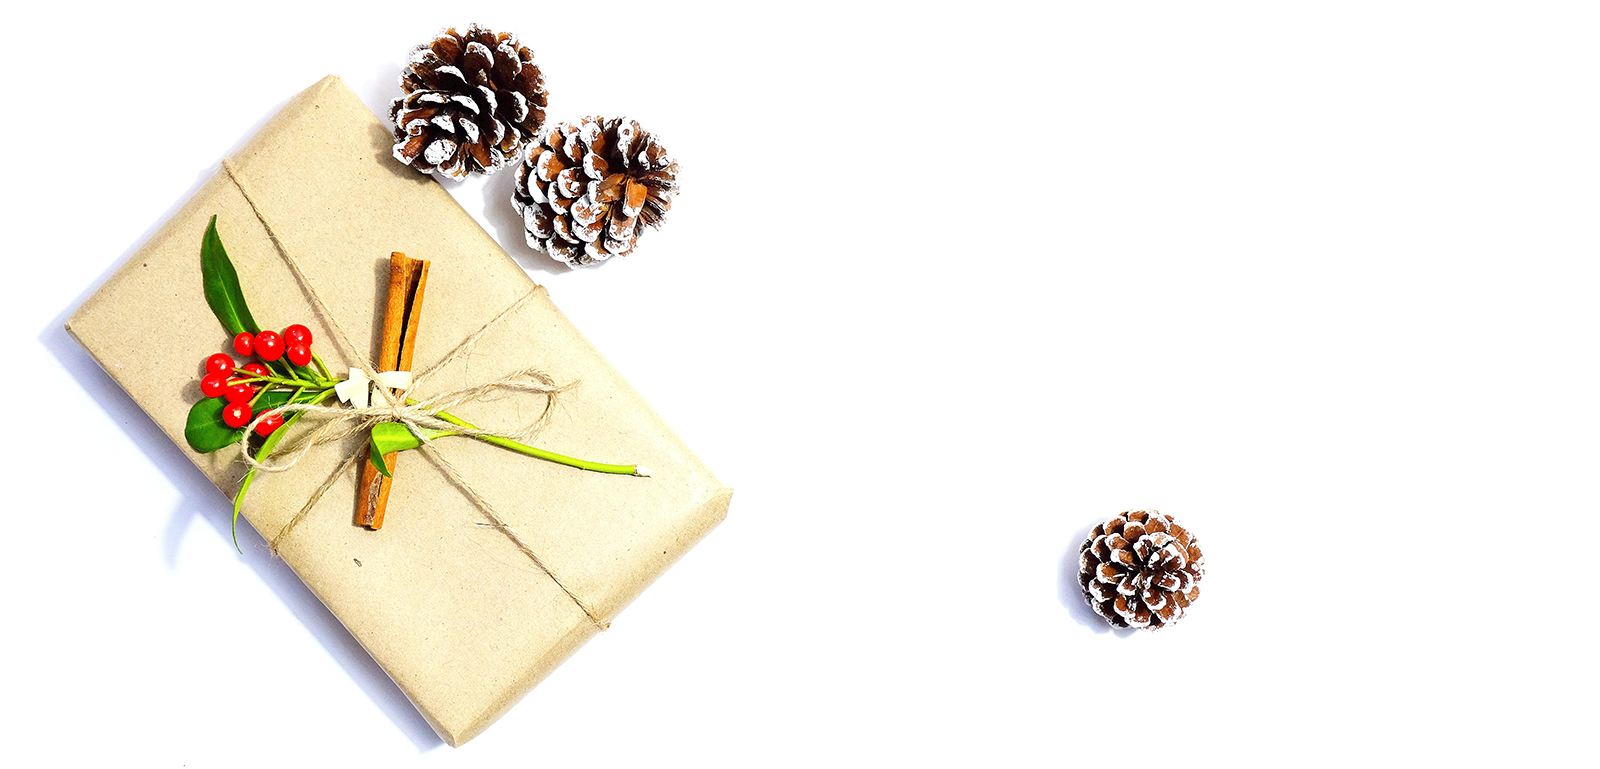 gift wrapped in brown paper with twine and holly next to pinecones